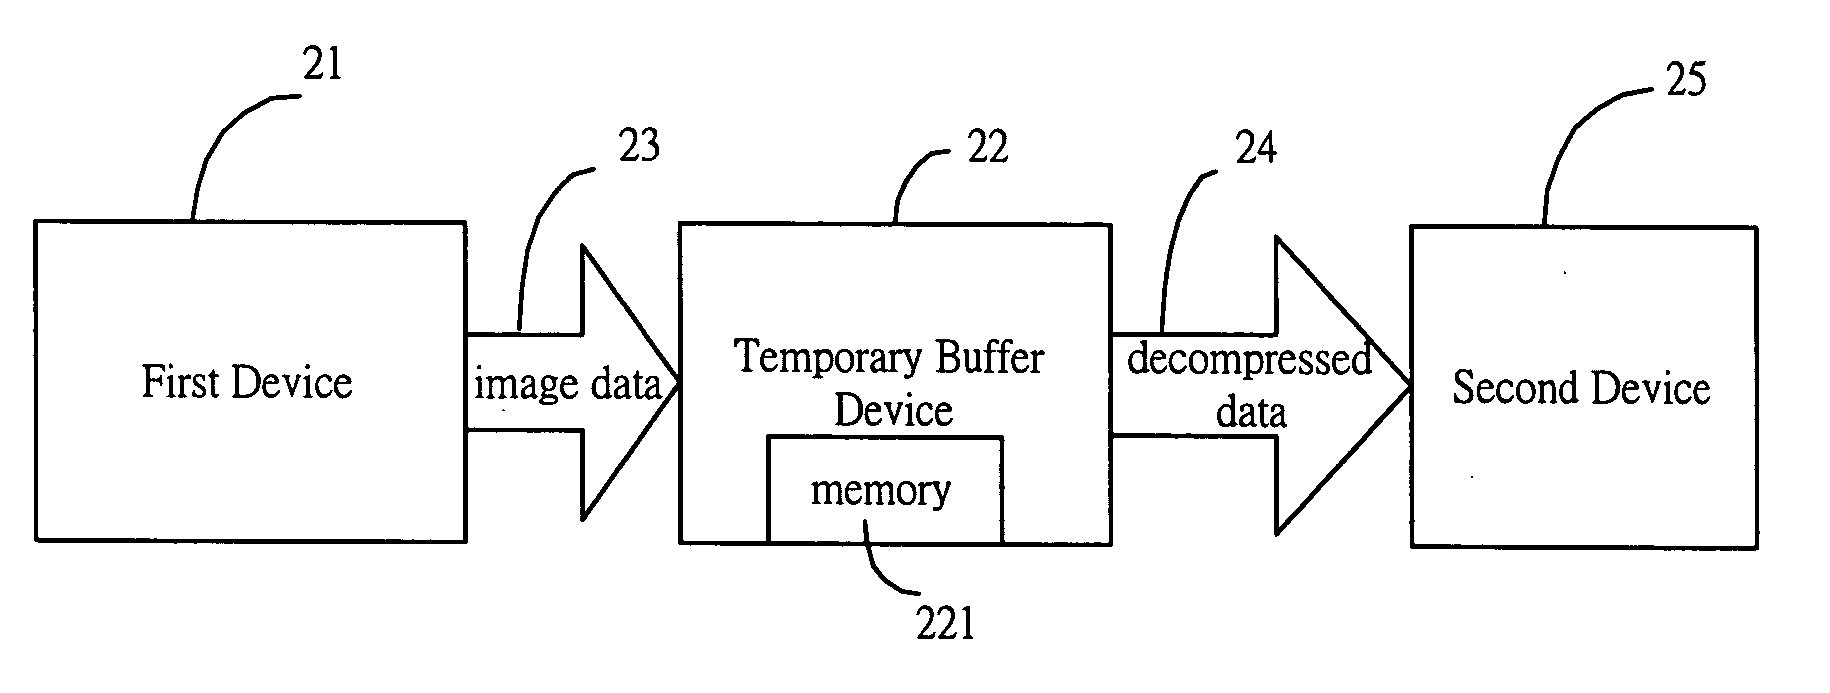 Method and device for temporarily storing image data